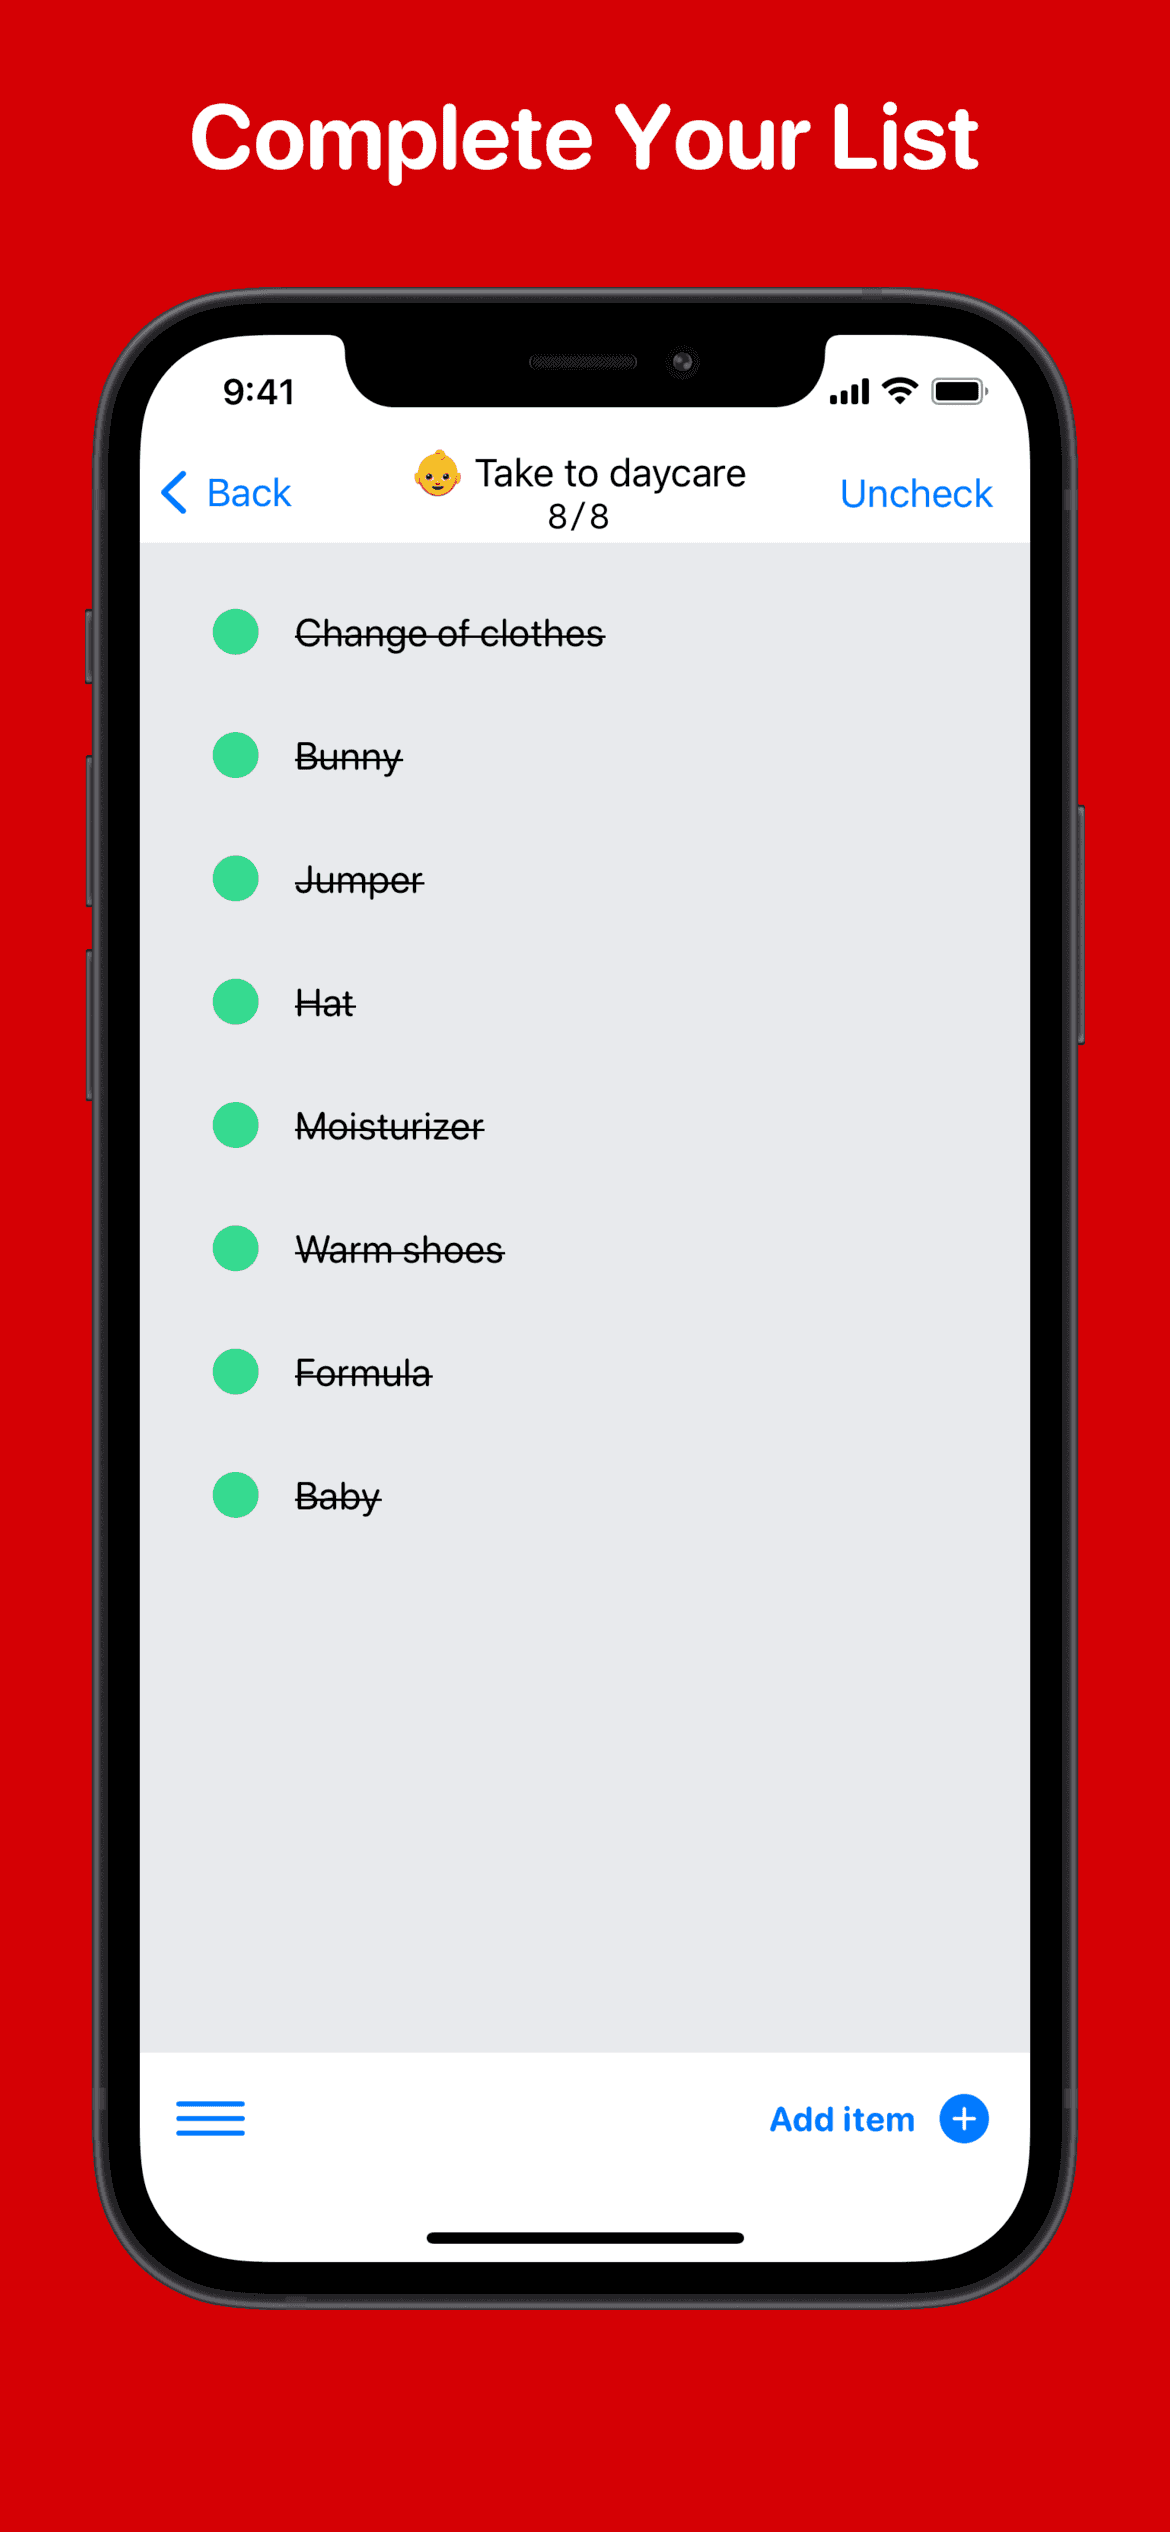 iPhone showing completed checklist